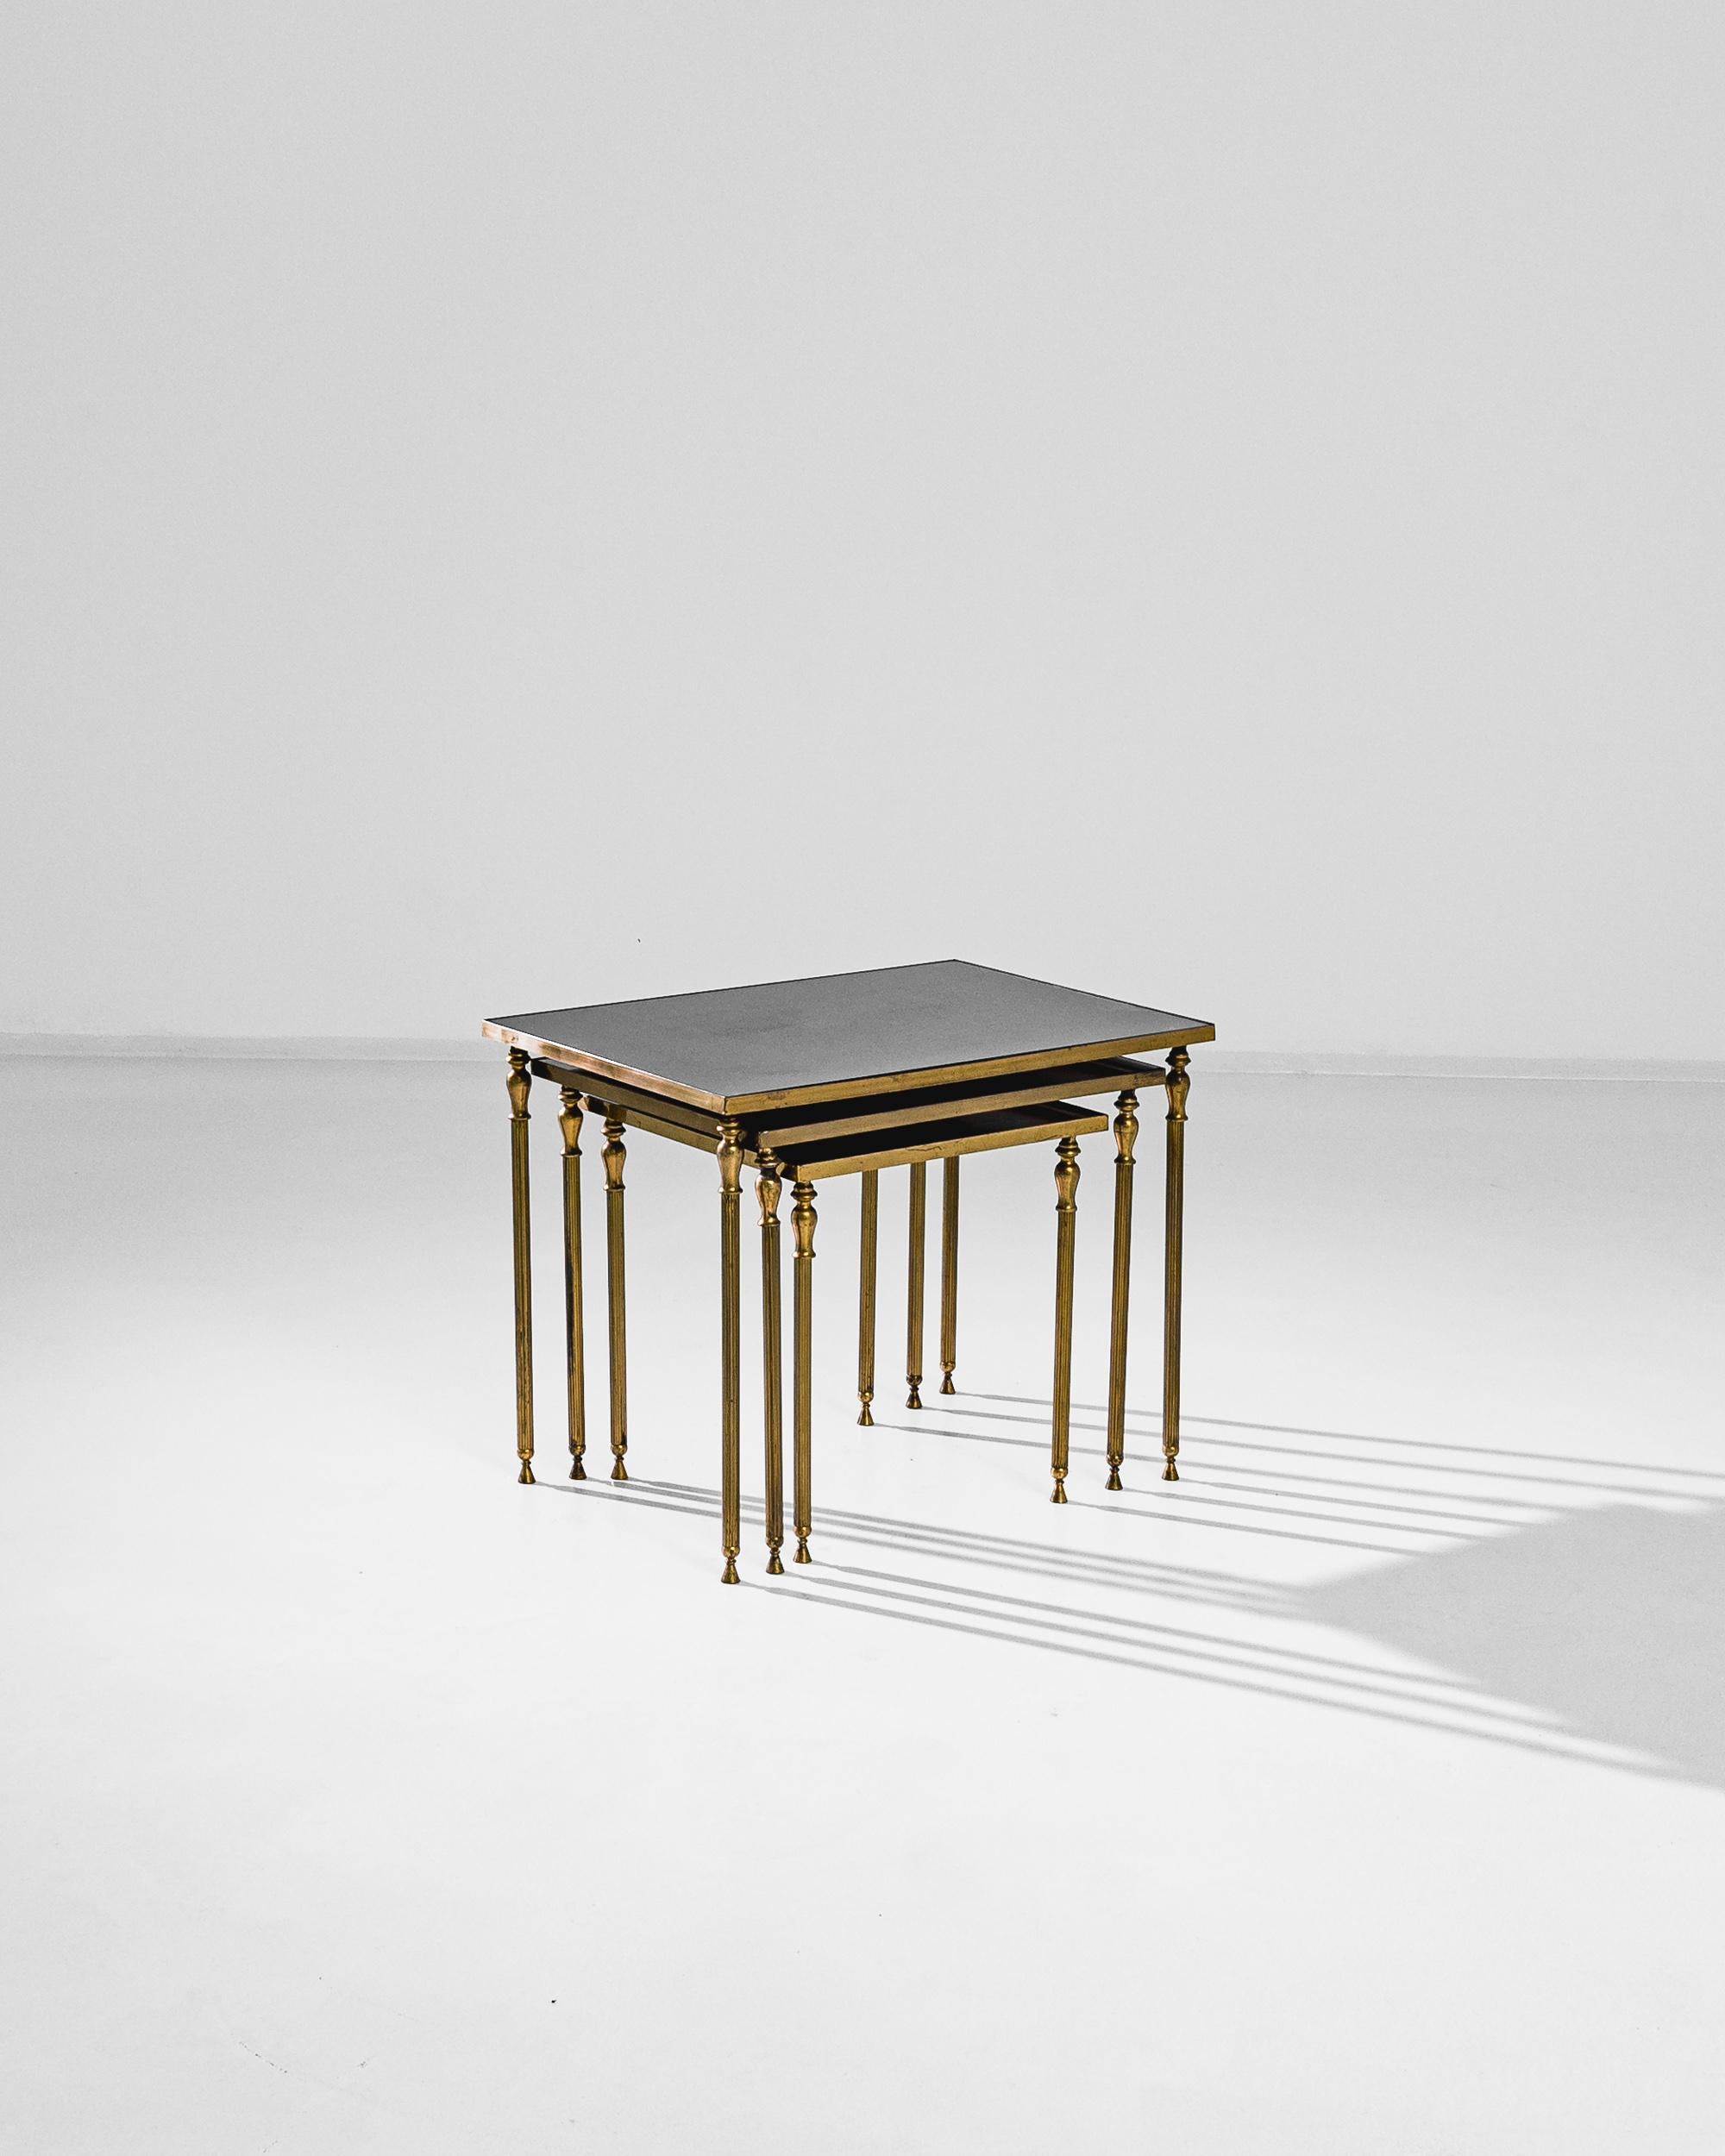 This trio of nesting tables provides a sophisticated accent. Made in France in the 1960s, a gilded brass frame supports a tabletop of obscure, smoke-grey glass. Fluted legs, crowned with golden urns, create a Neo-classical silhouette — while the